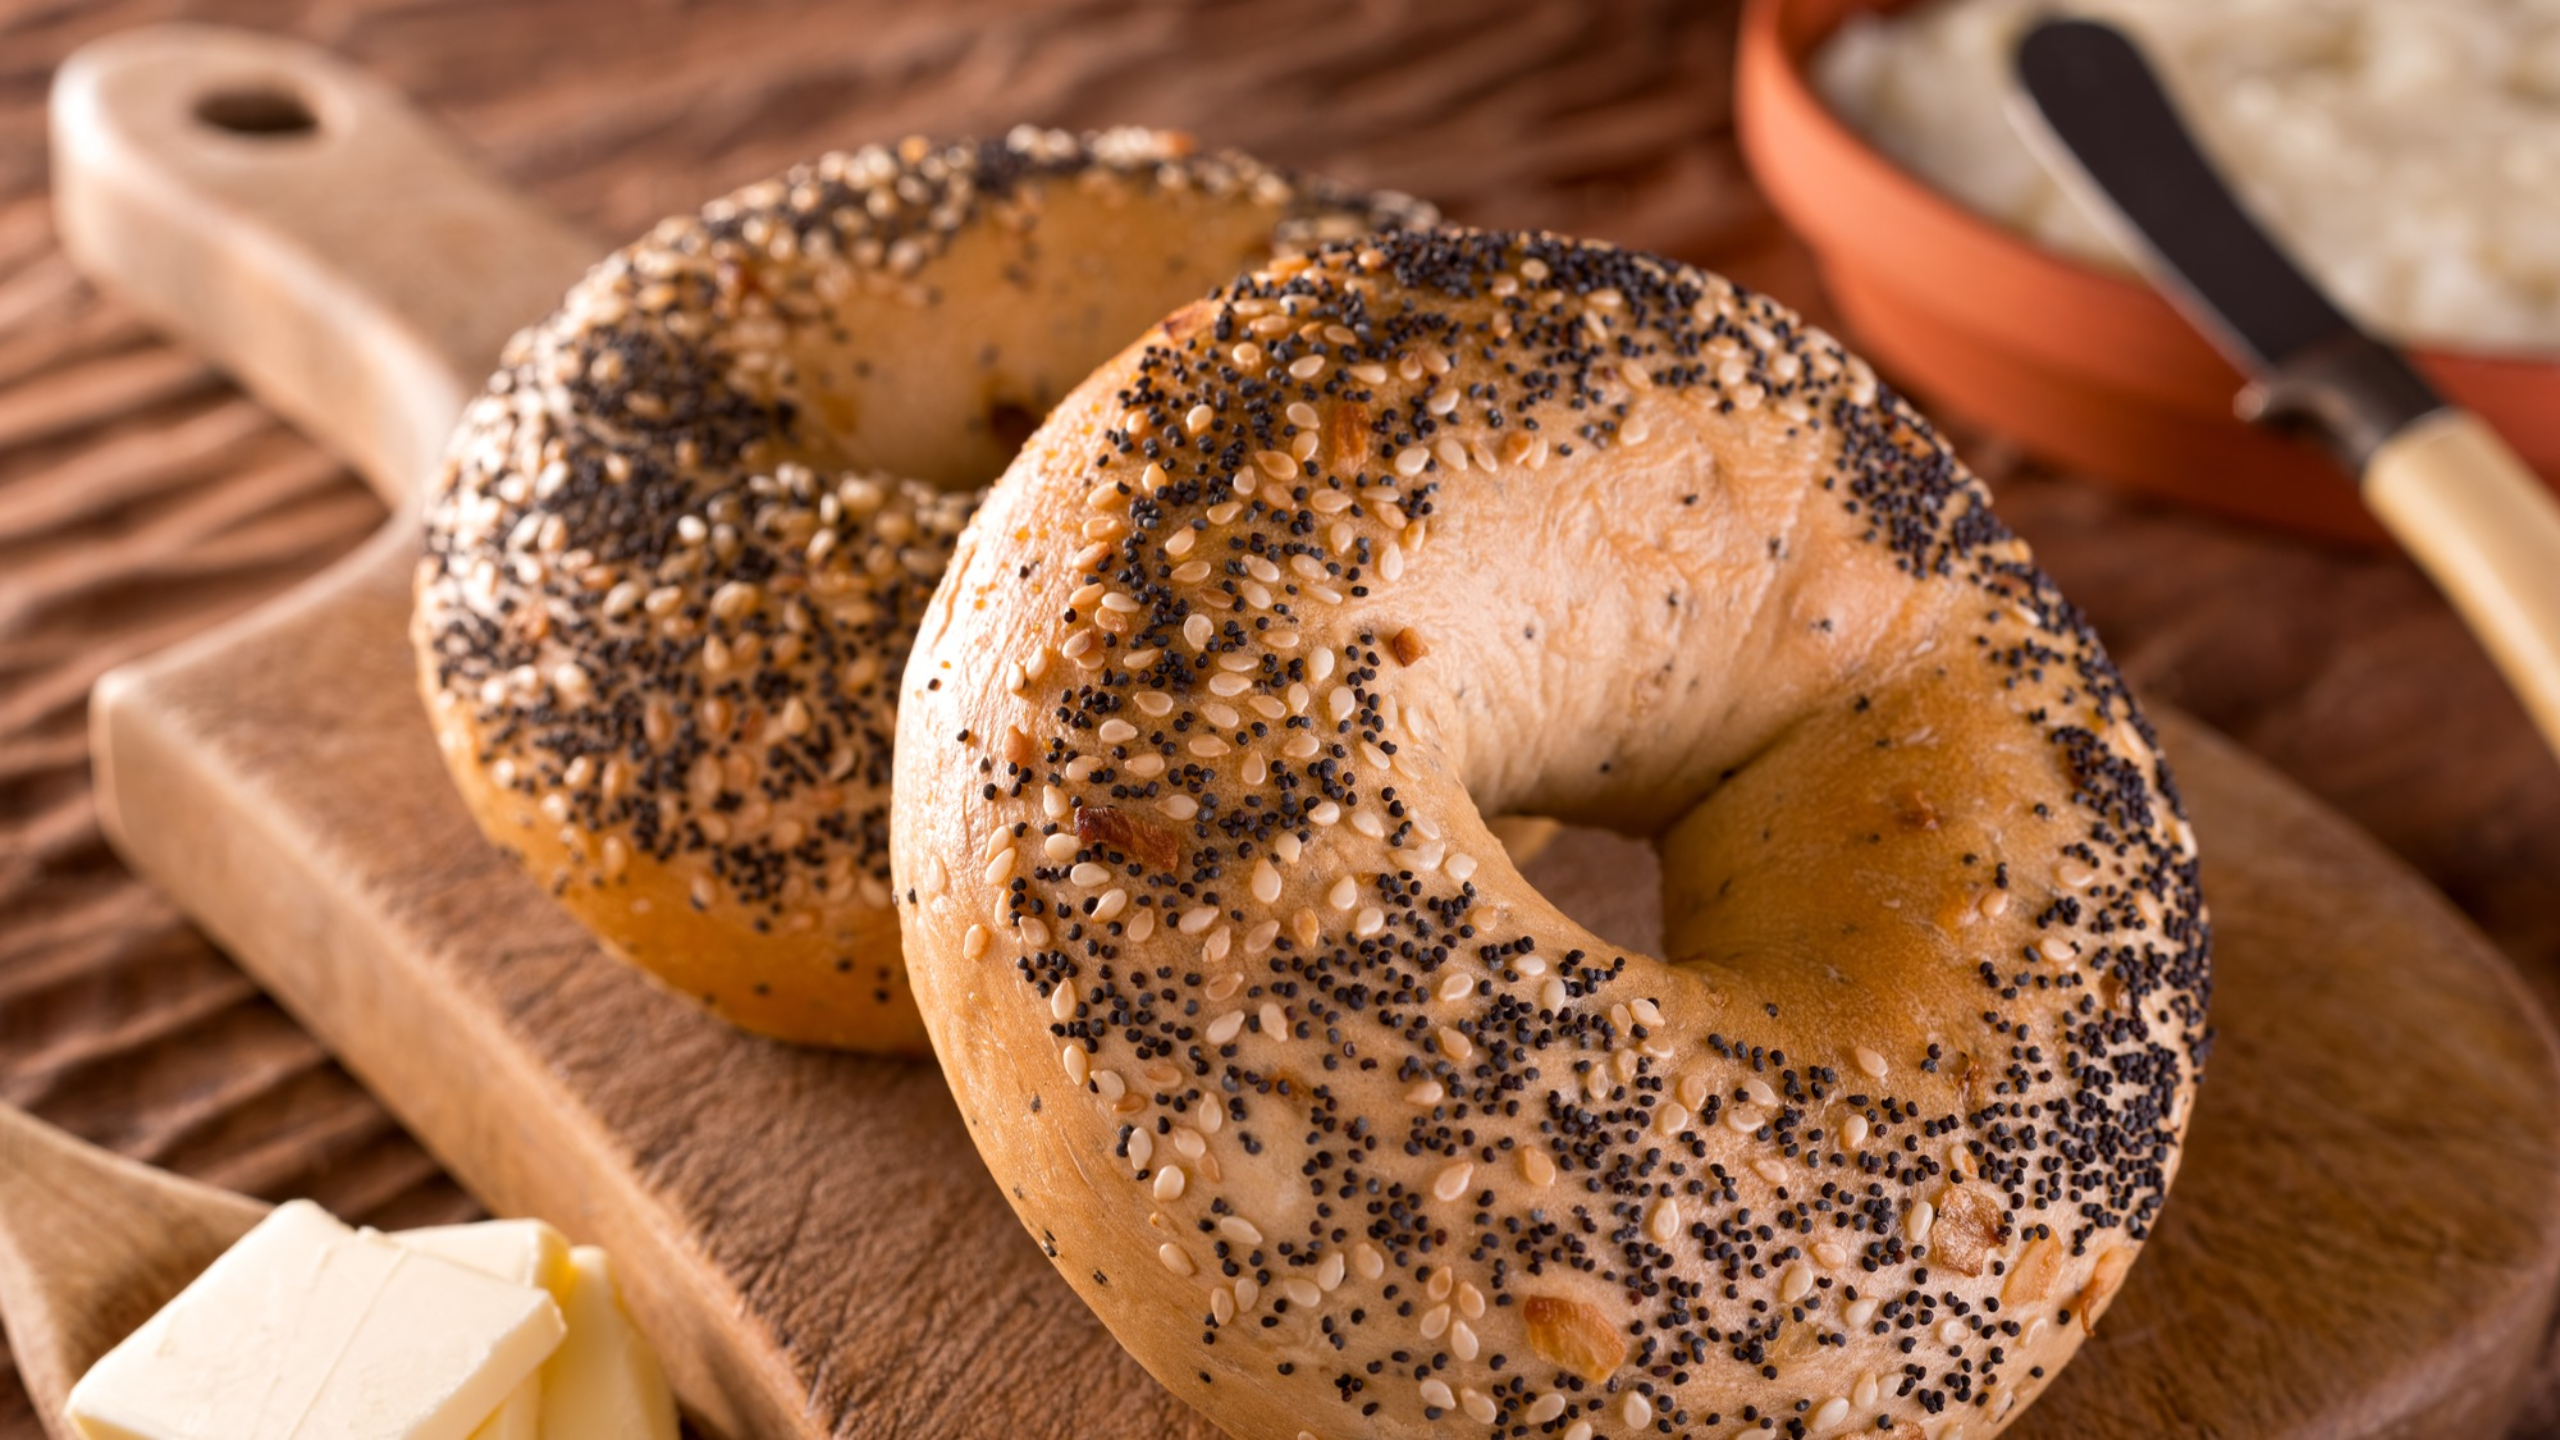 Eating culinary poppy seeds won’t get you high, but they could lead to a failed drug test.